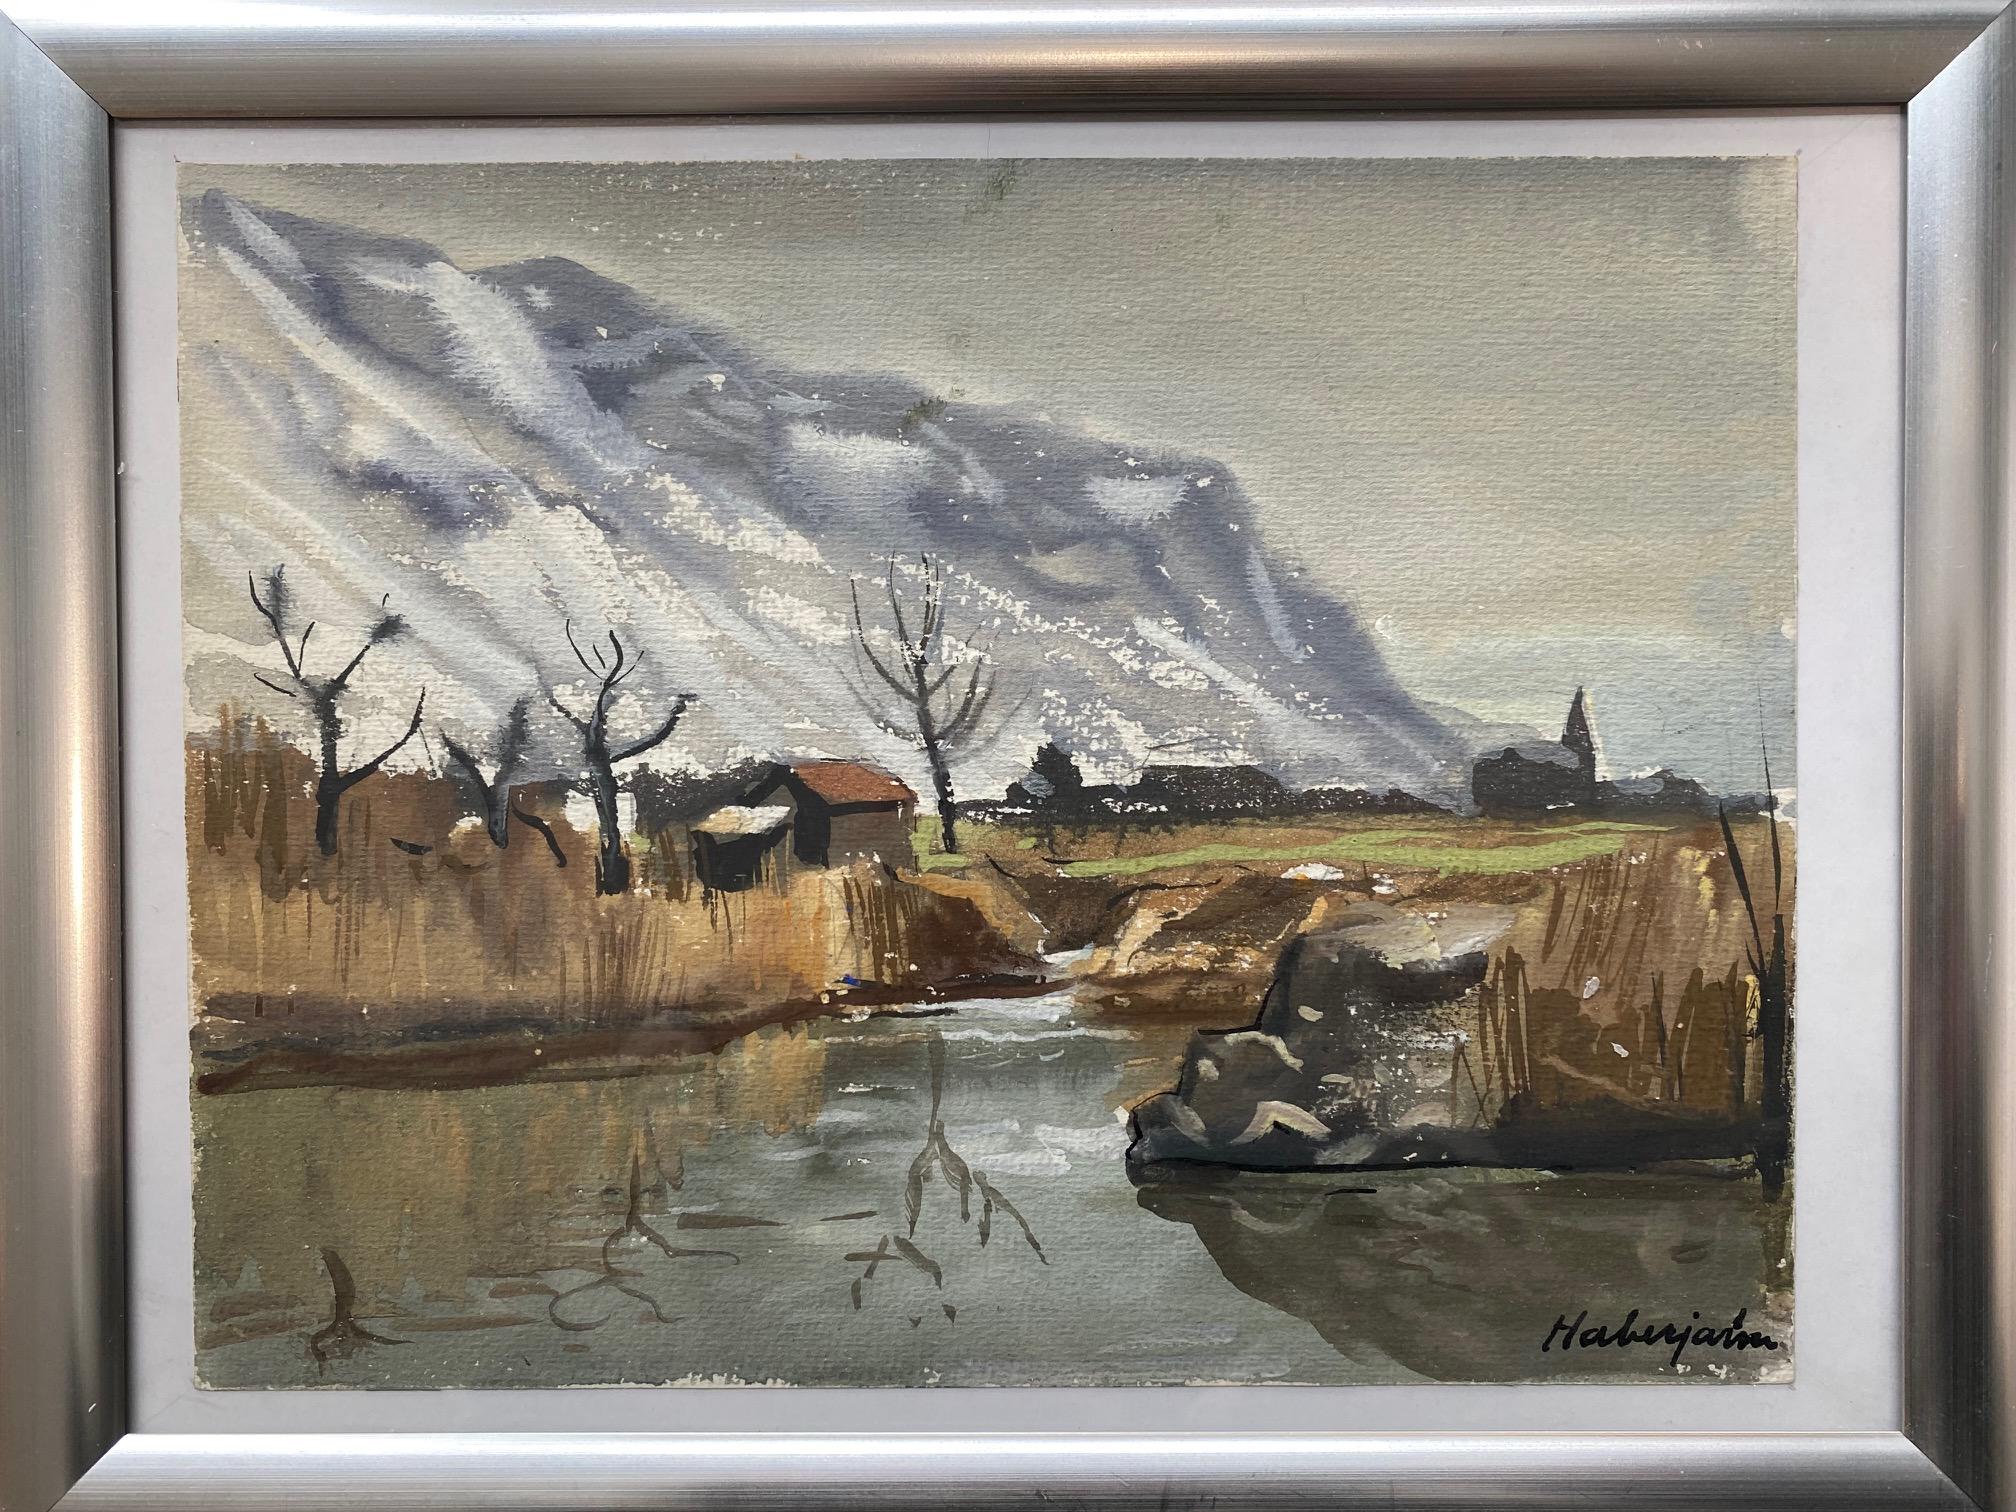 River and snowy mountains by G. E. Haberjahn - Watercolor on paper 16x21 cm - Painting by Gabriel Eduard Haberjahn